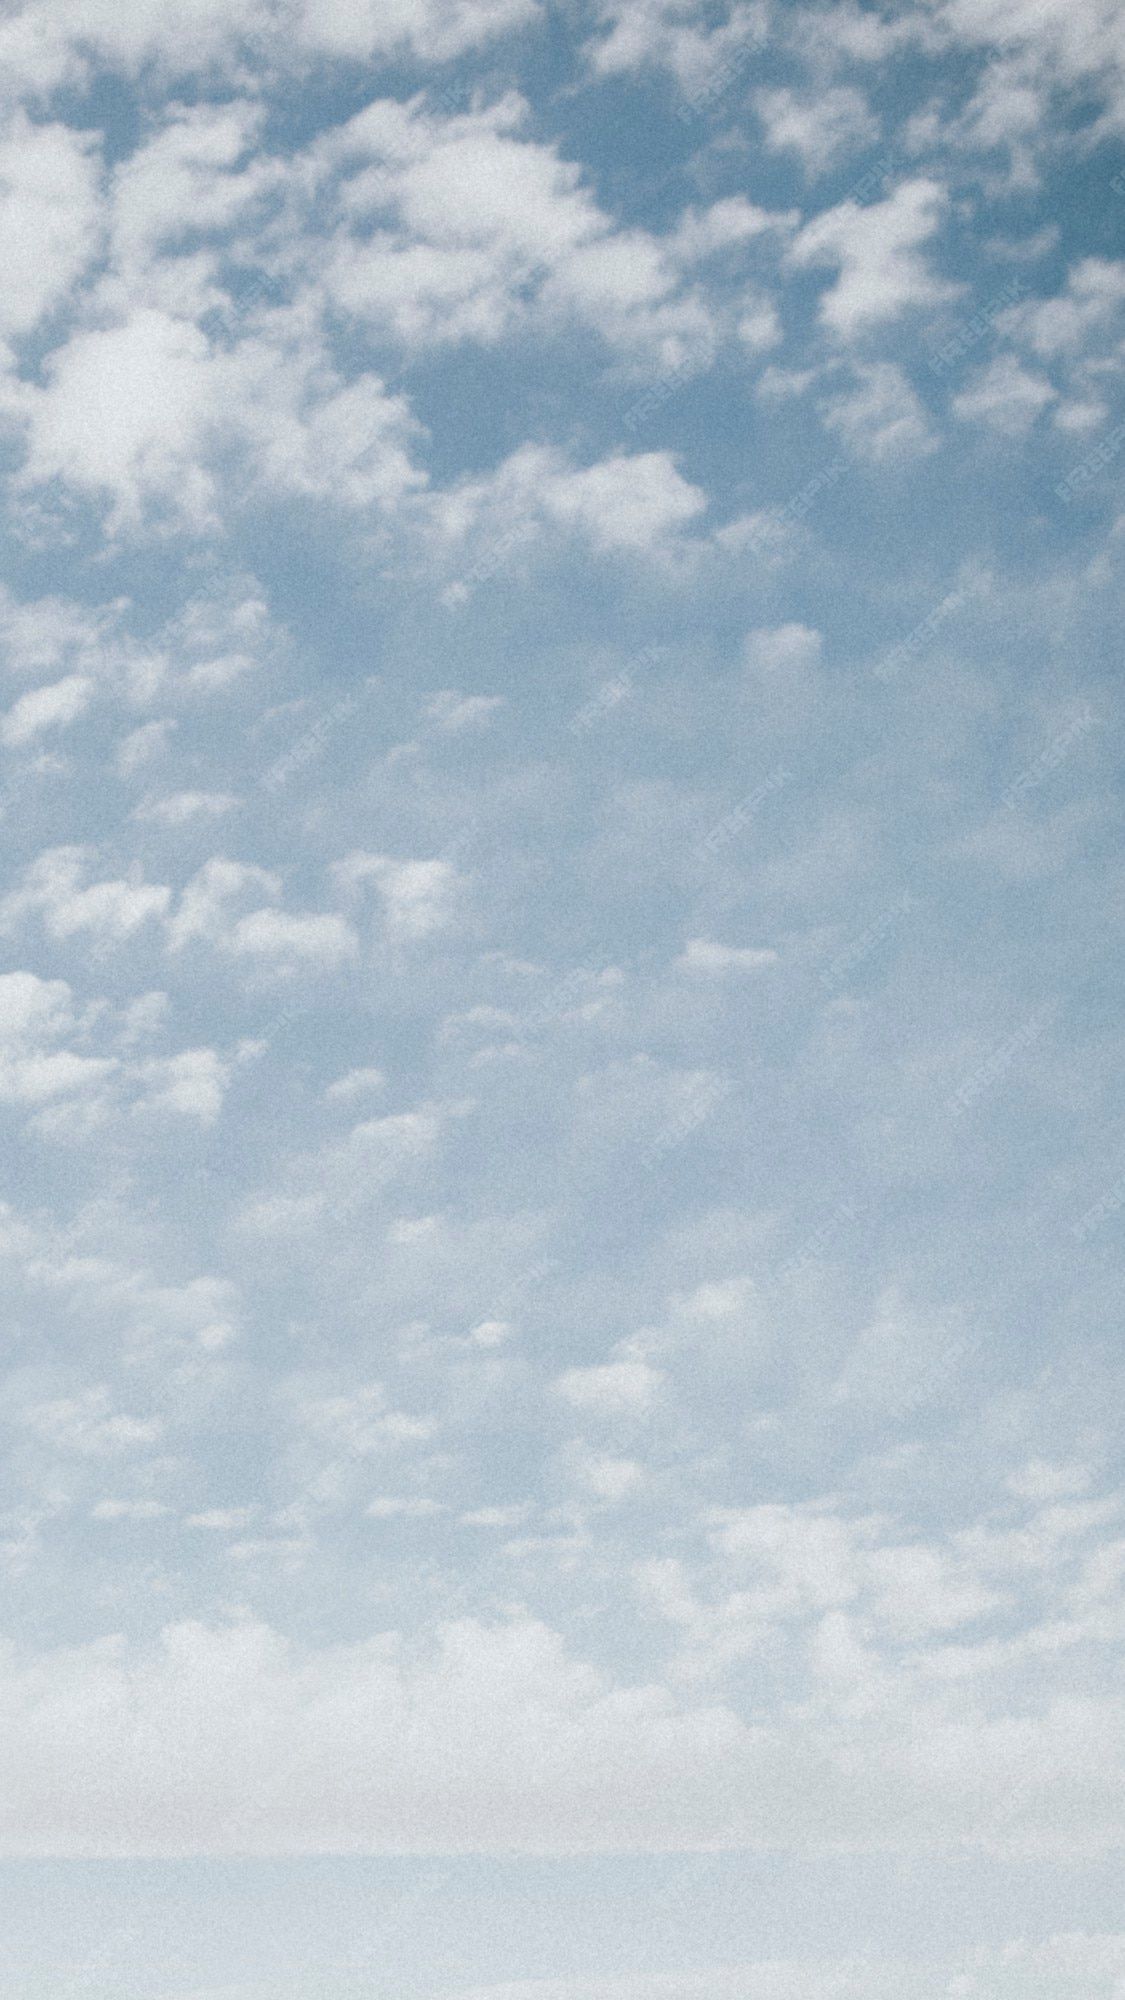 Premium Photo. Clouds scattered across the summer sky mobile wallpaper